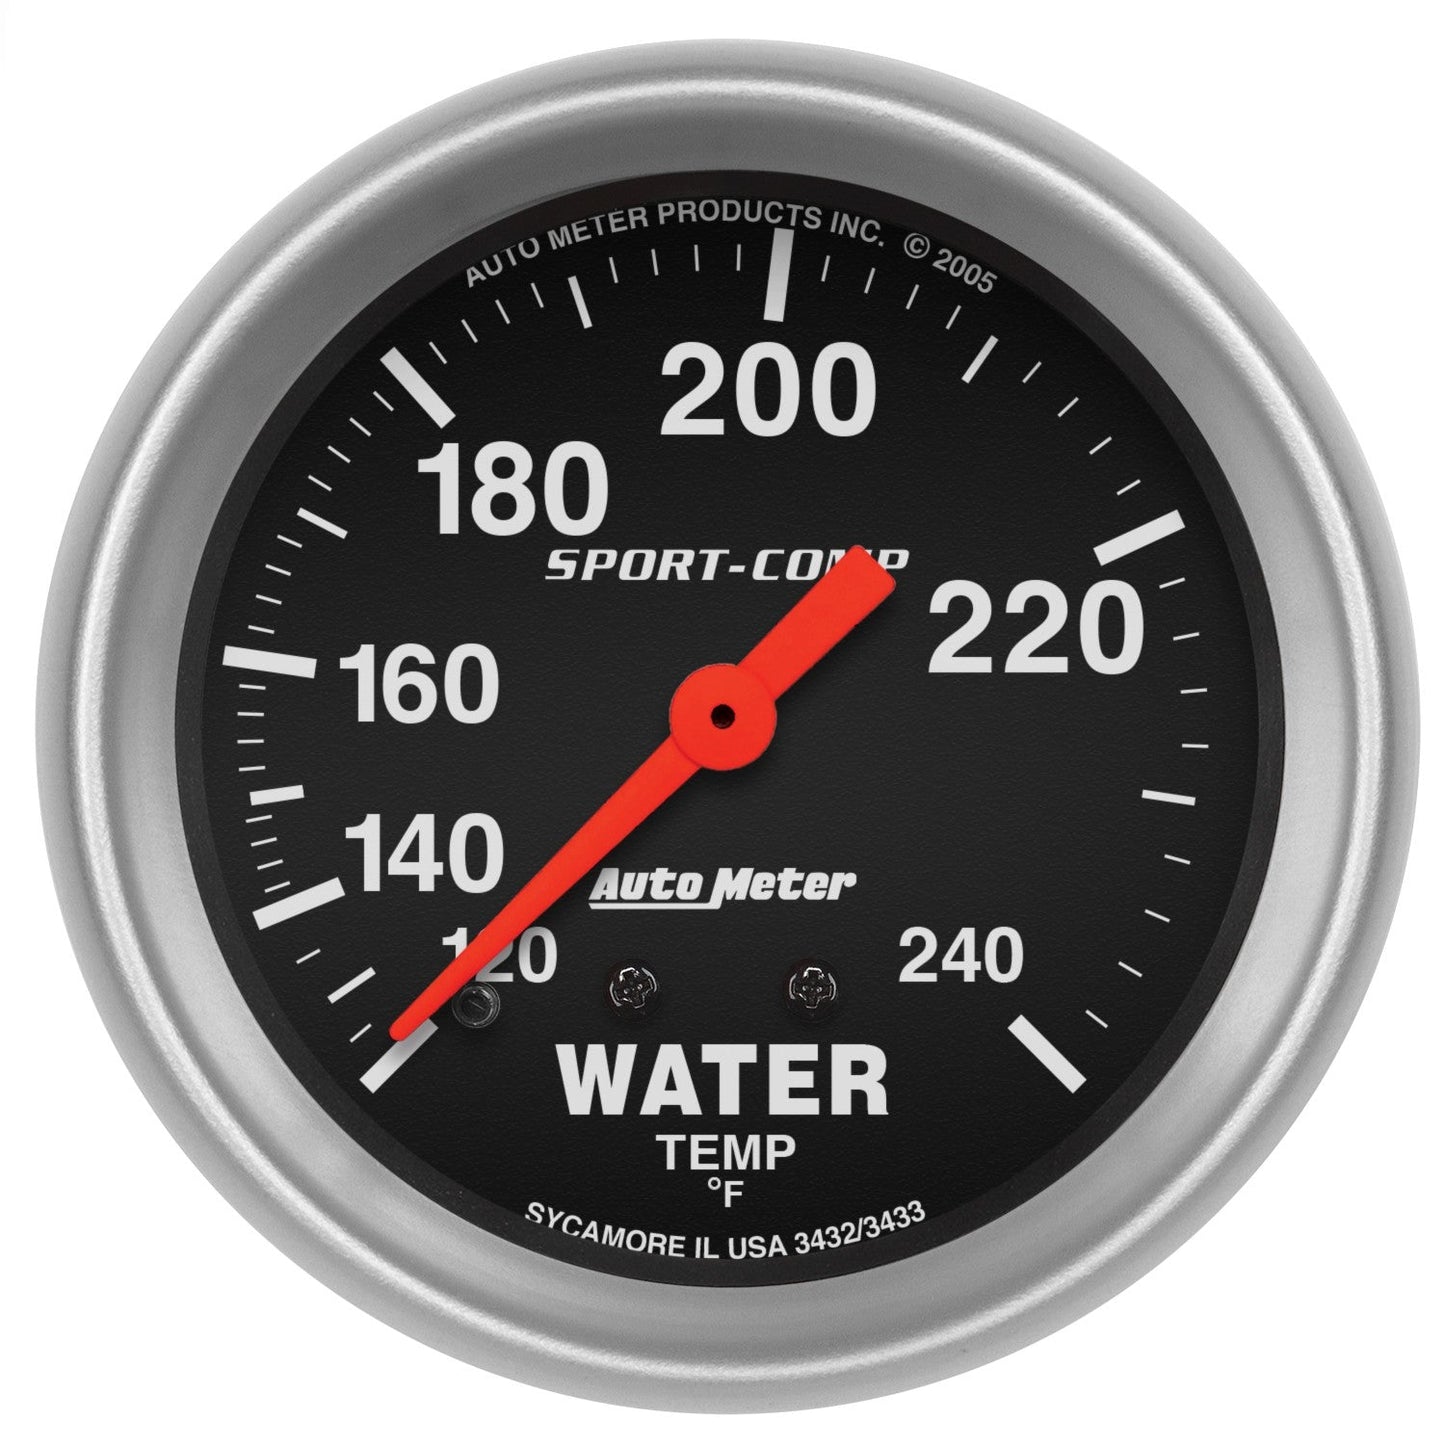 AutoMeter - 2-5/8" WATER TEMPERATURE, 120-240 °F, 6 FT., MECHANICAL, SPORT-COMP (3432)